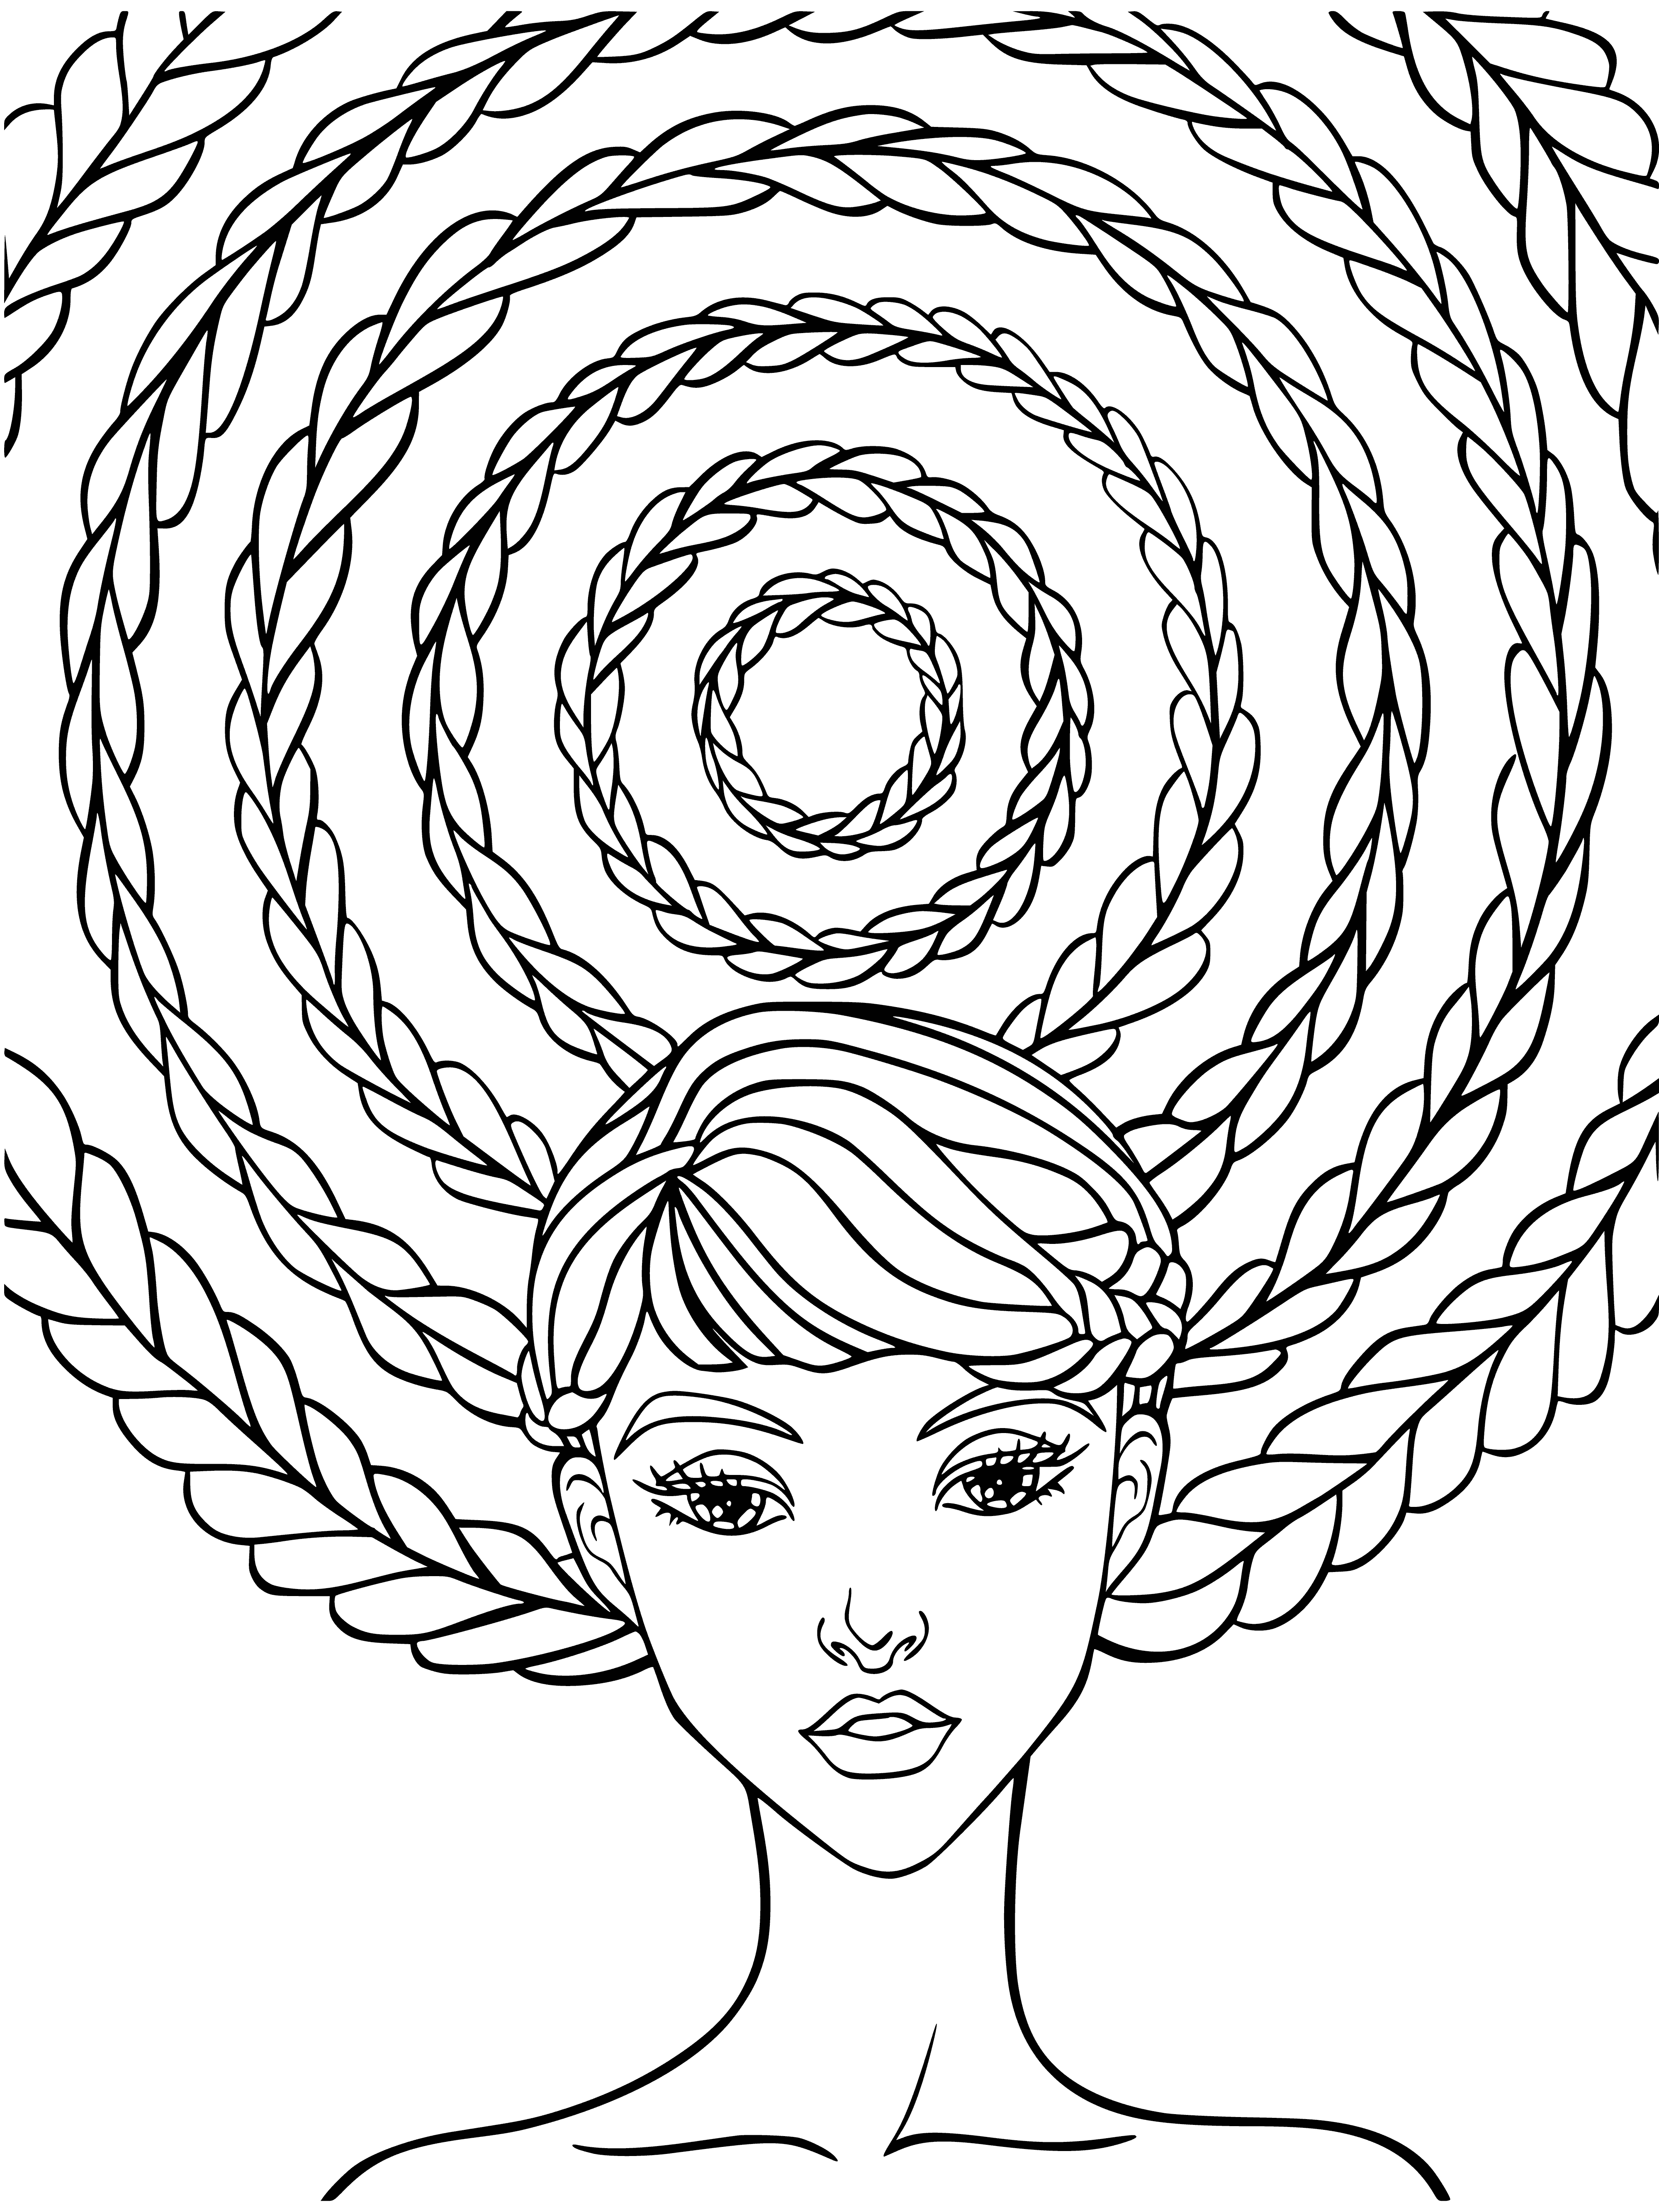 Braids coloring page